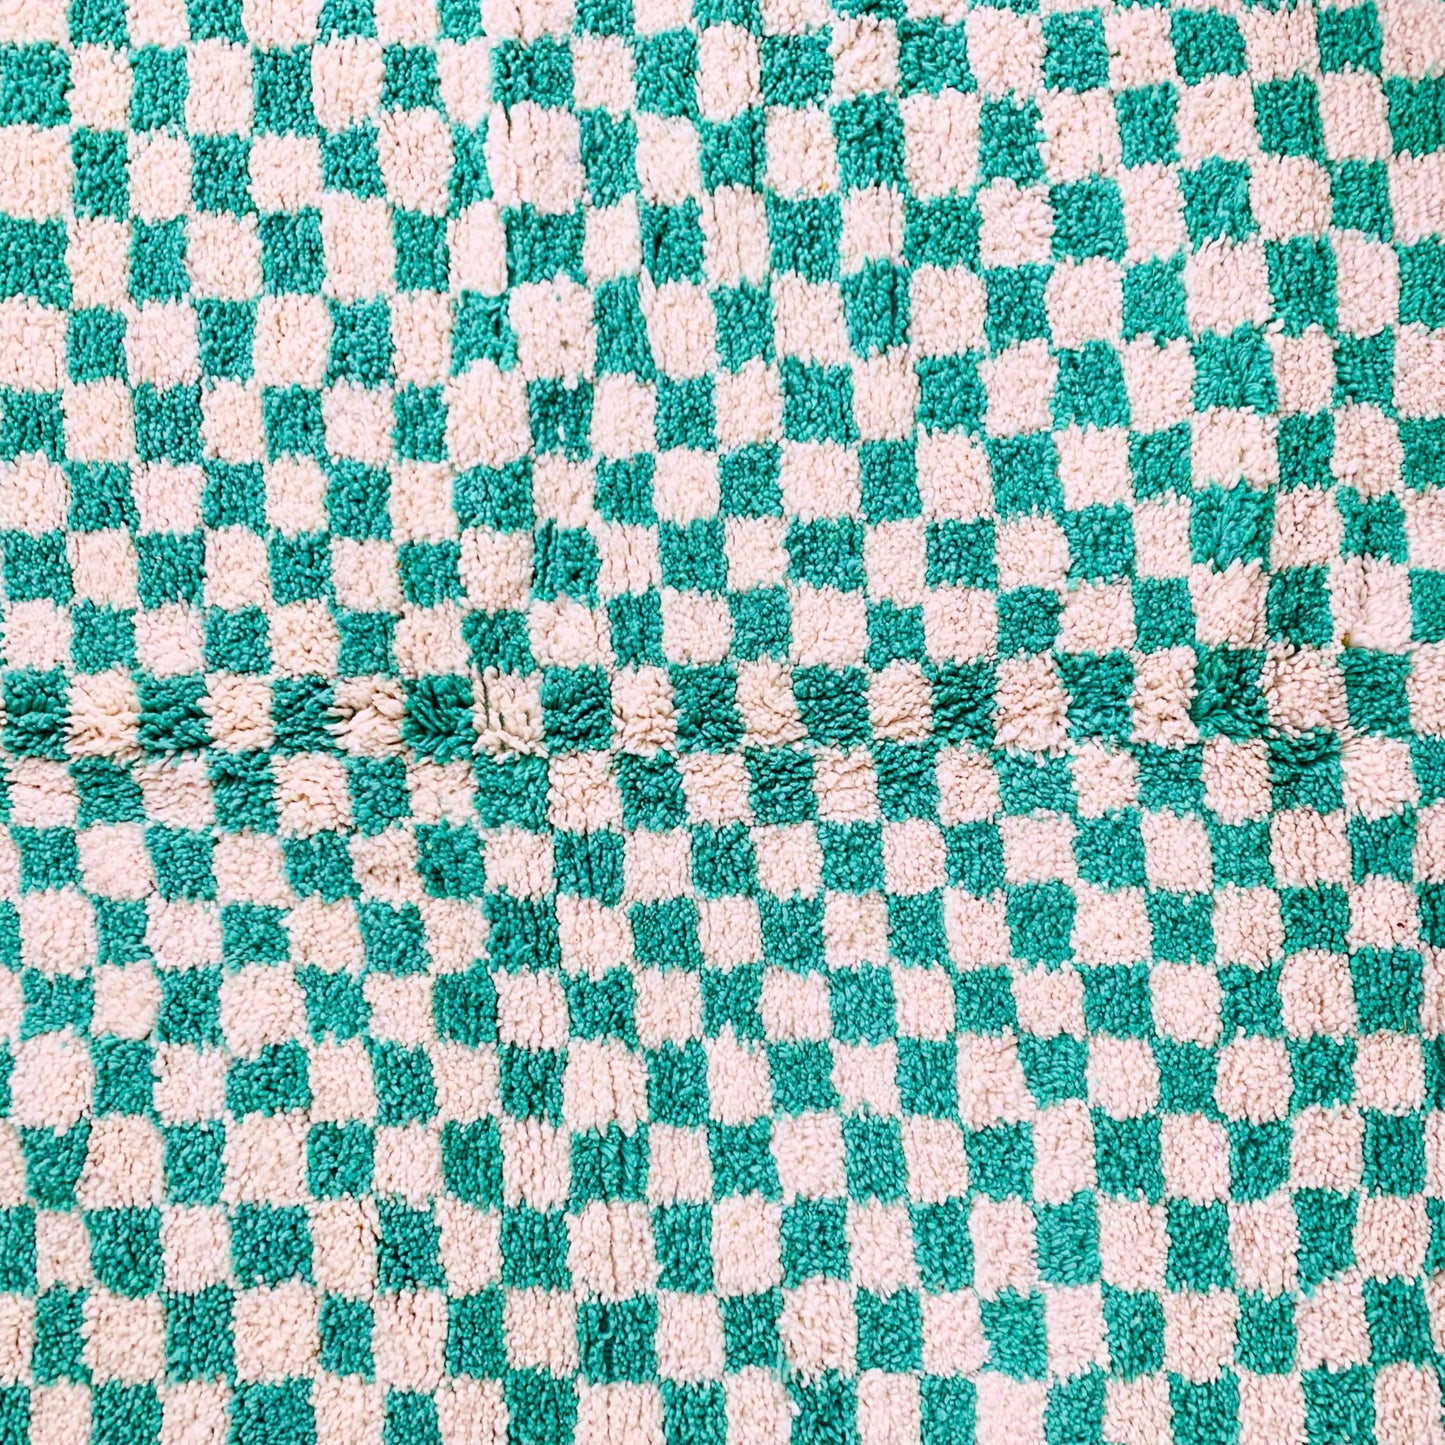 Green-and-white-checkered-rug